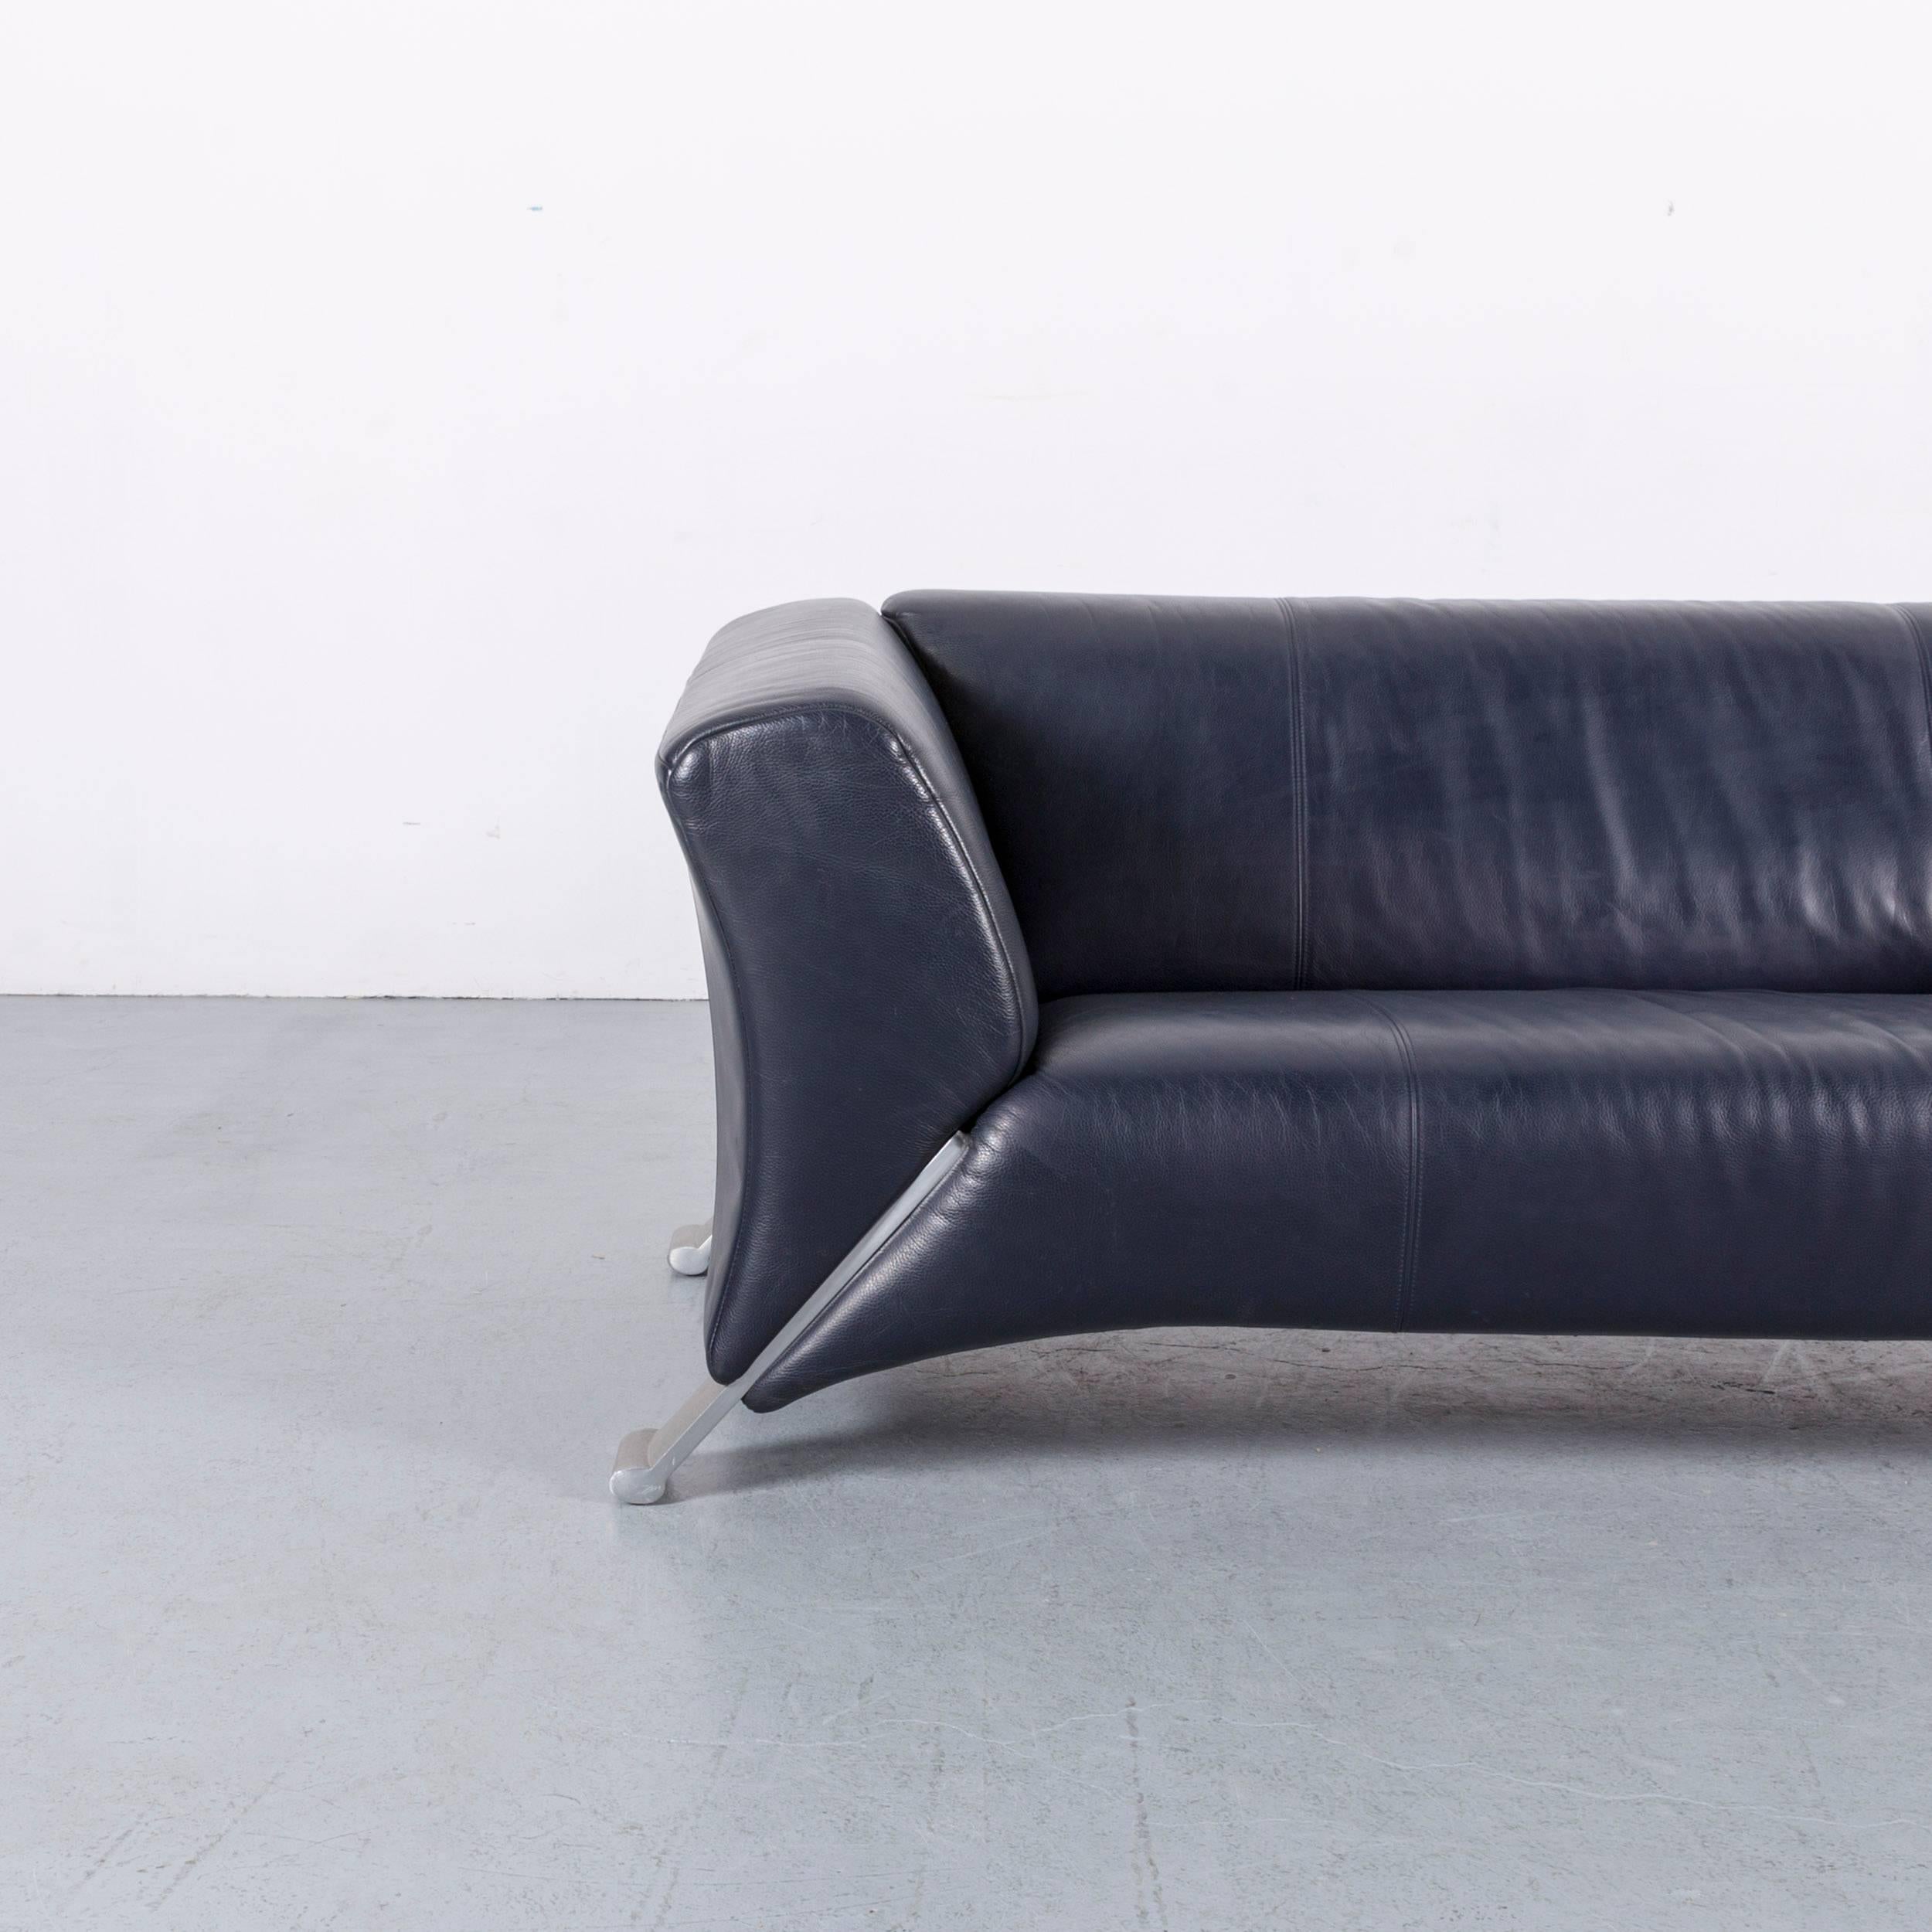 We bring to you an Rolf Benz 322 designer sofa dark blue two-seat leather modern couch metal feet.